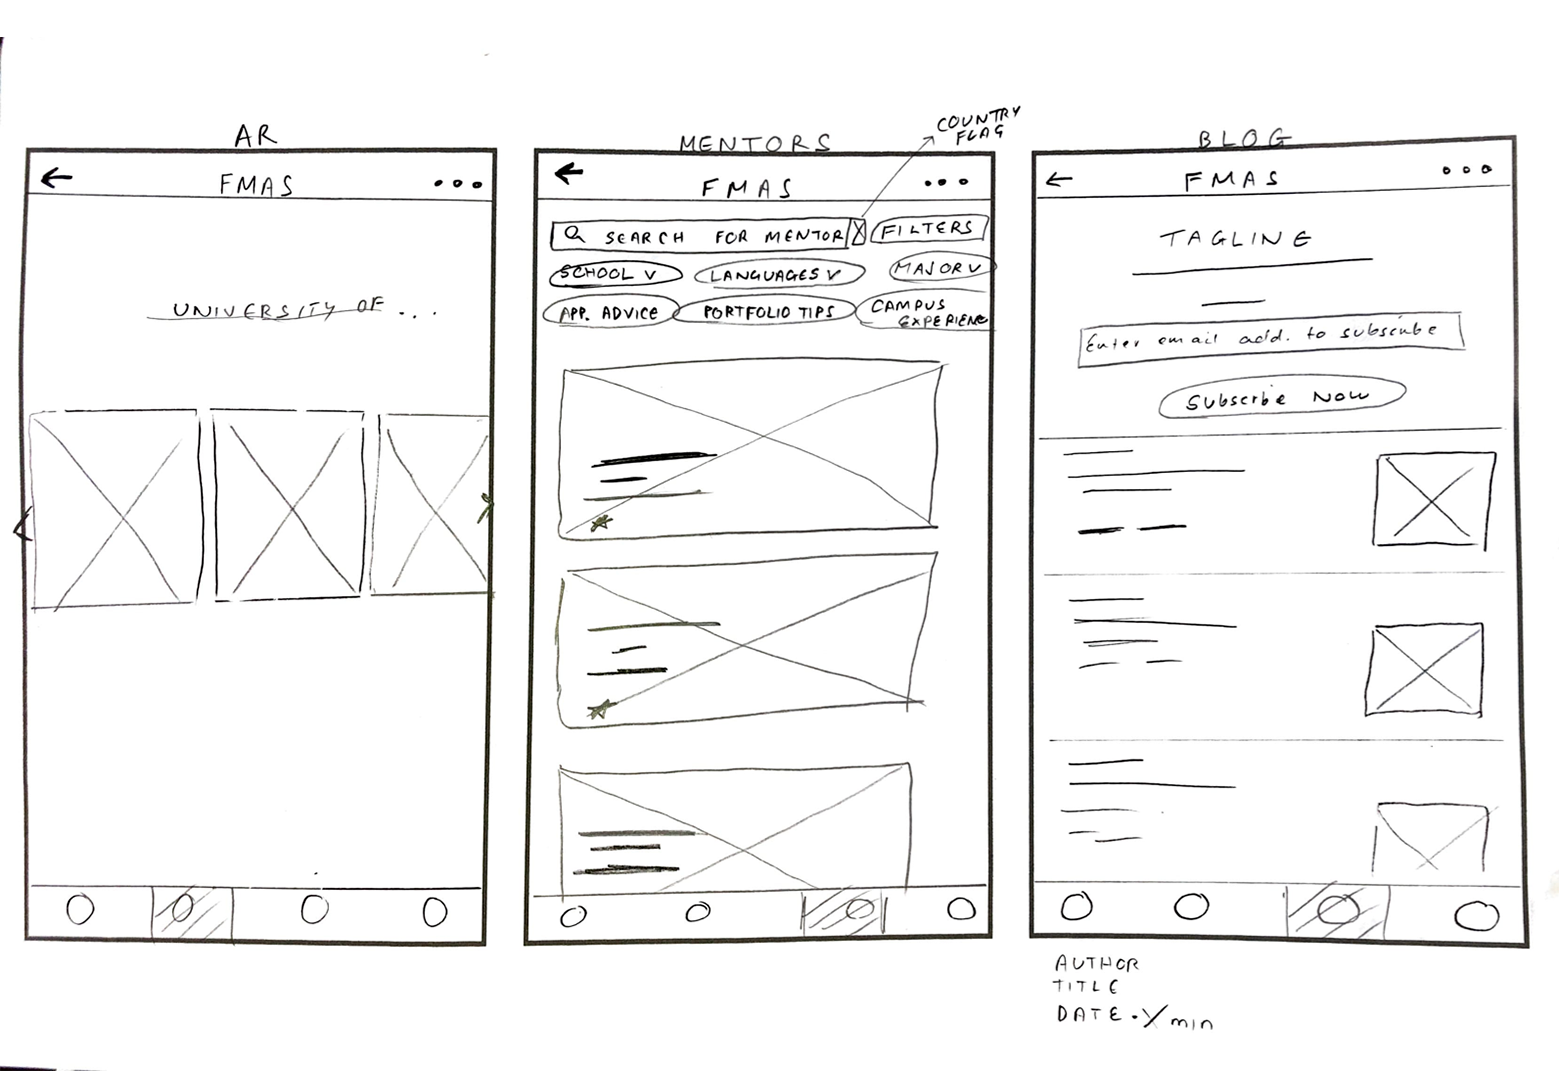 Wireframes: AR page, mentor search, blog